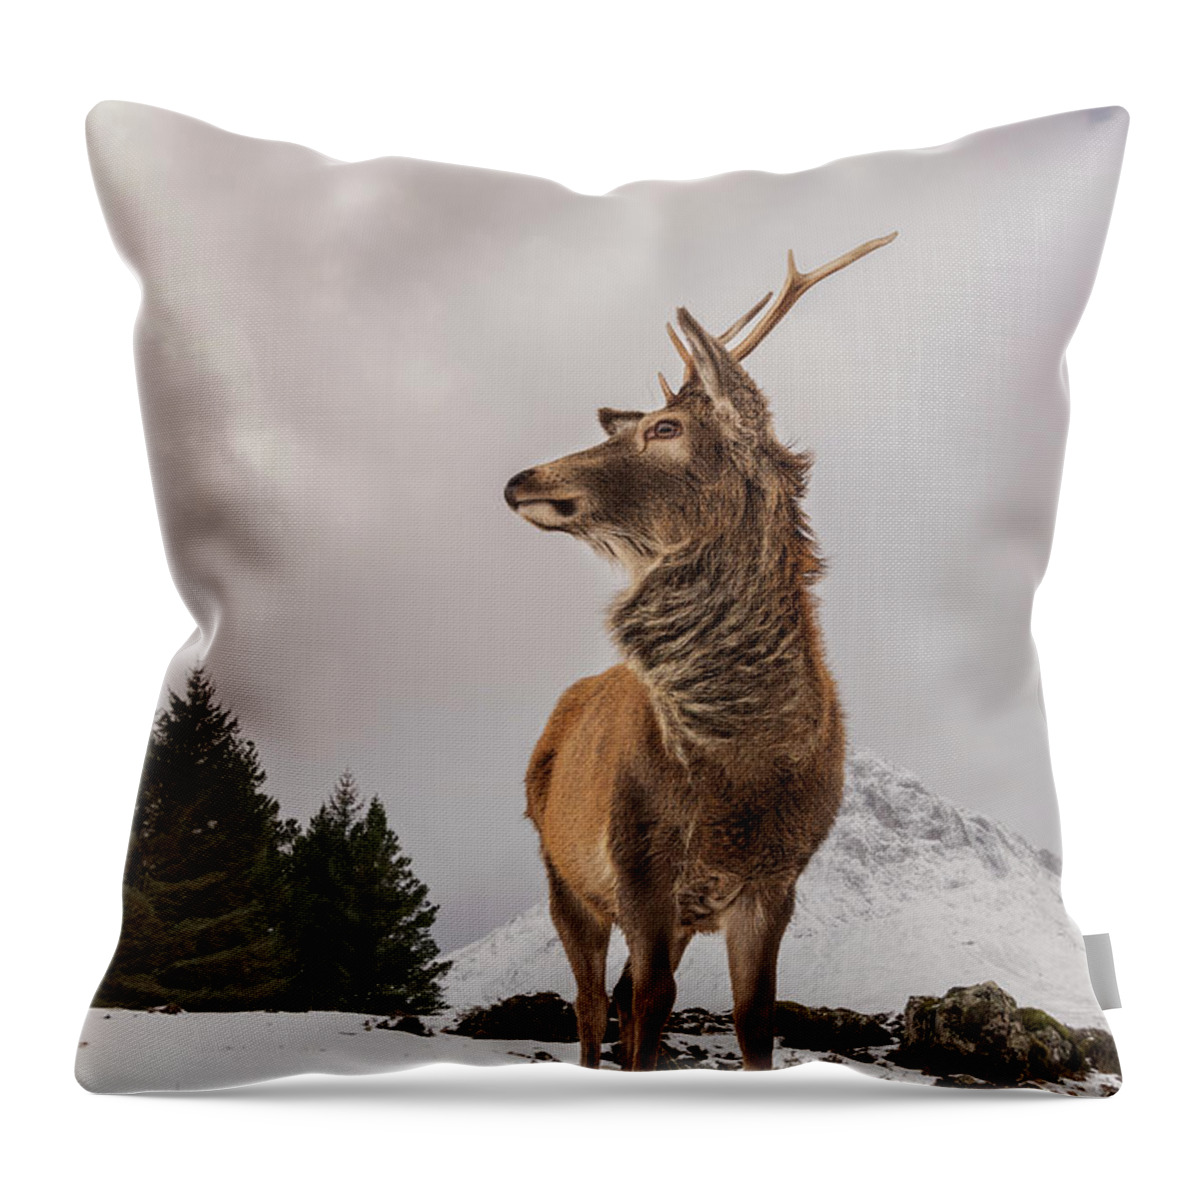 #reddeer #red Deer #scottishhighlands #glencoe #visitscotland # Throw Pillow featuring the photograph Red Deer Portrait #2 by Keith Thorburn LRPS EFIAP CPAGB